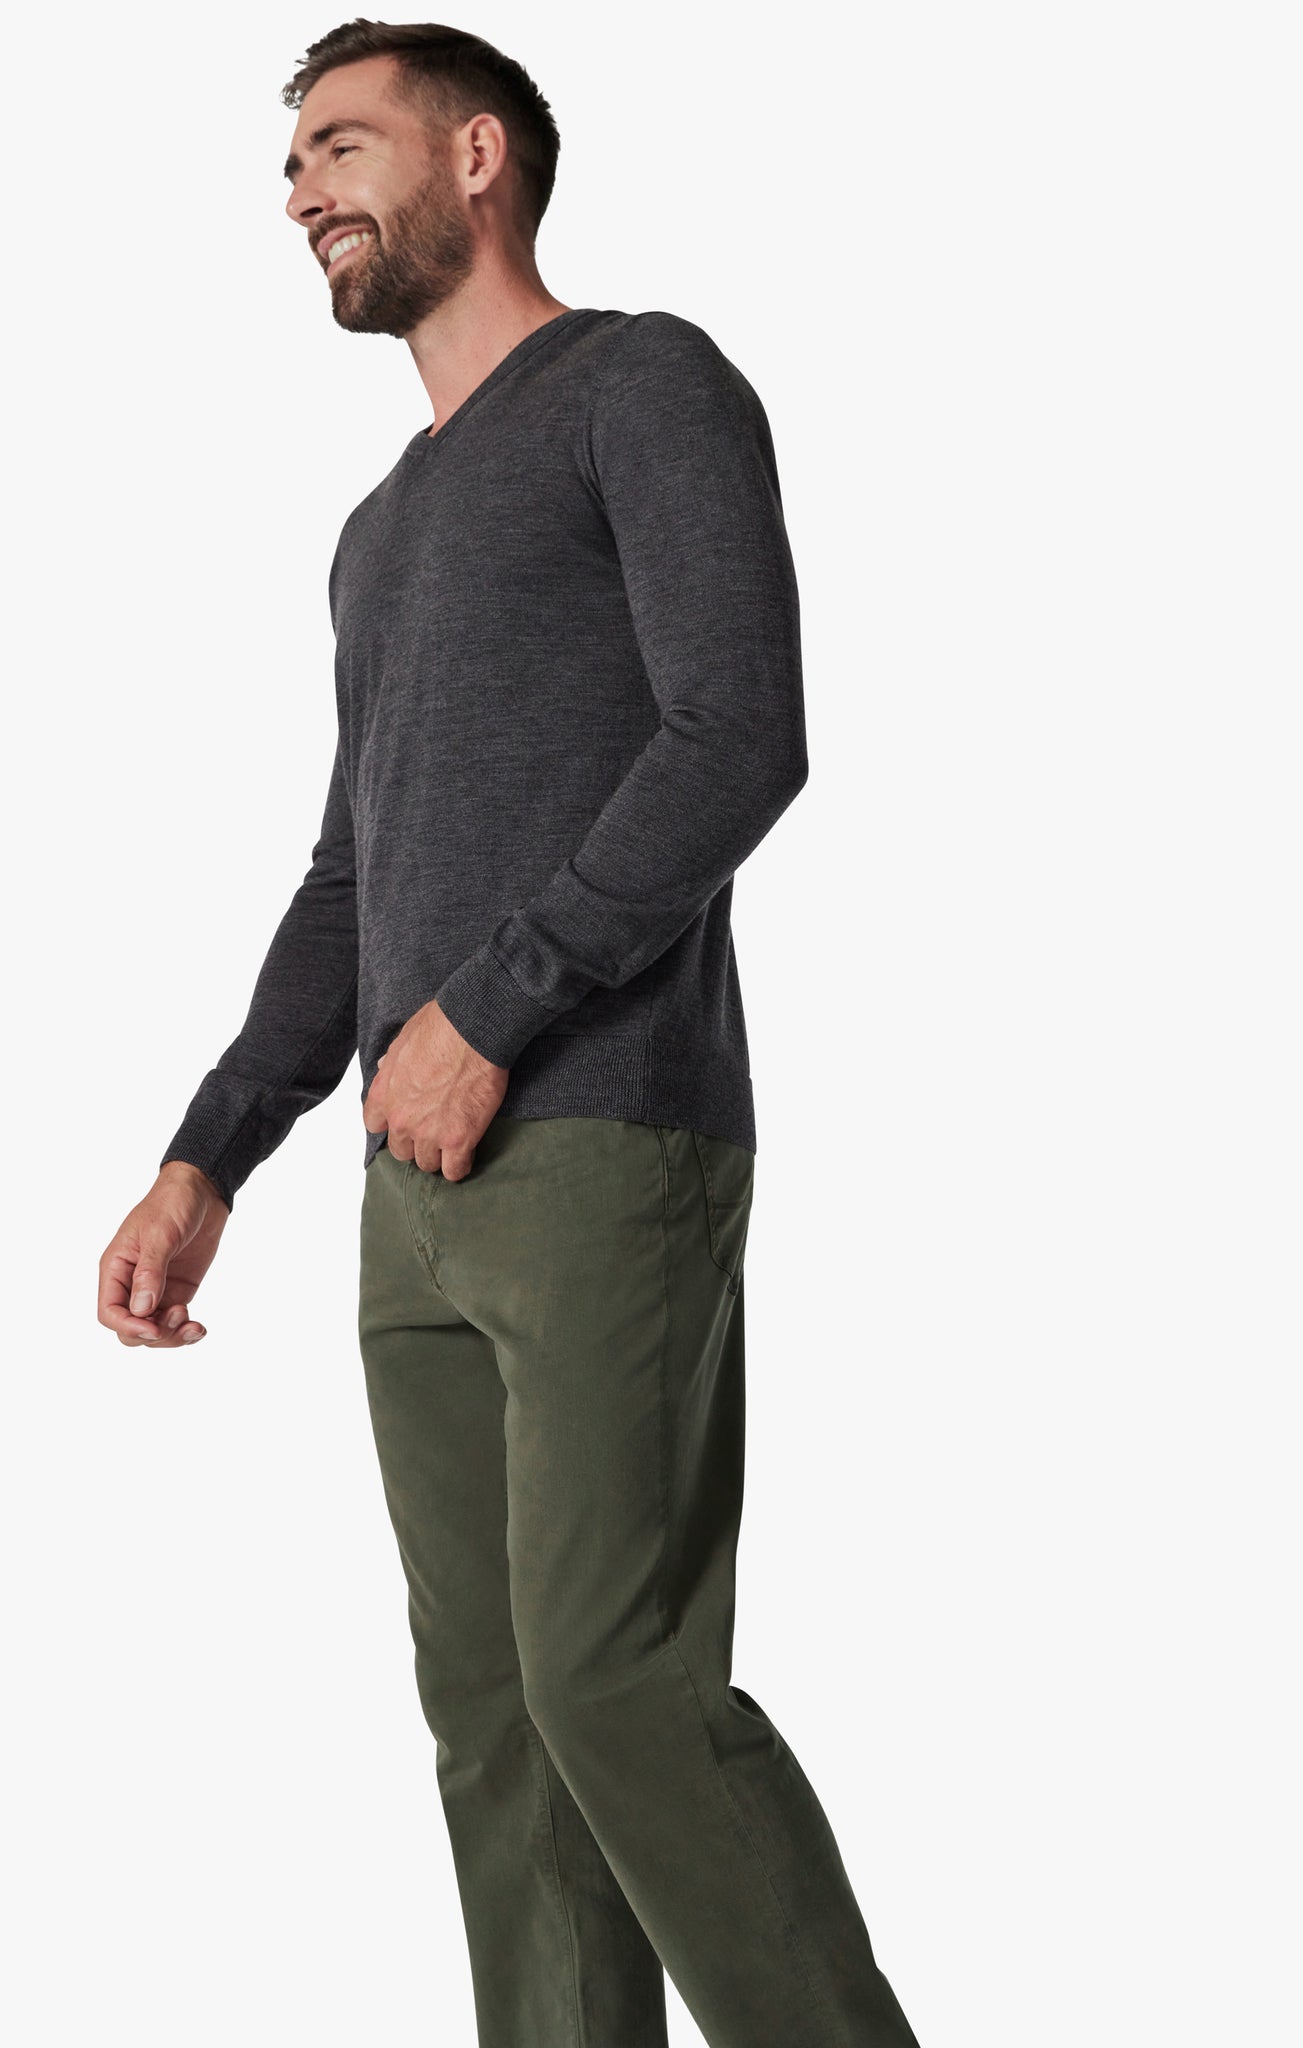 Charisma Relaxed Straight Leg Pants In Olive Twill